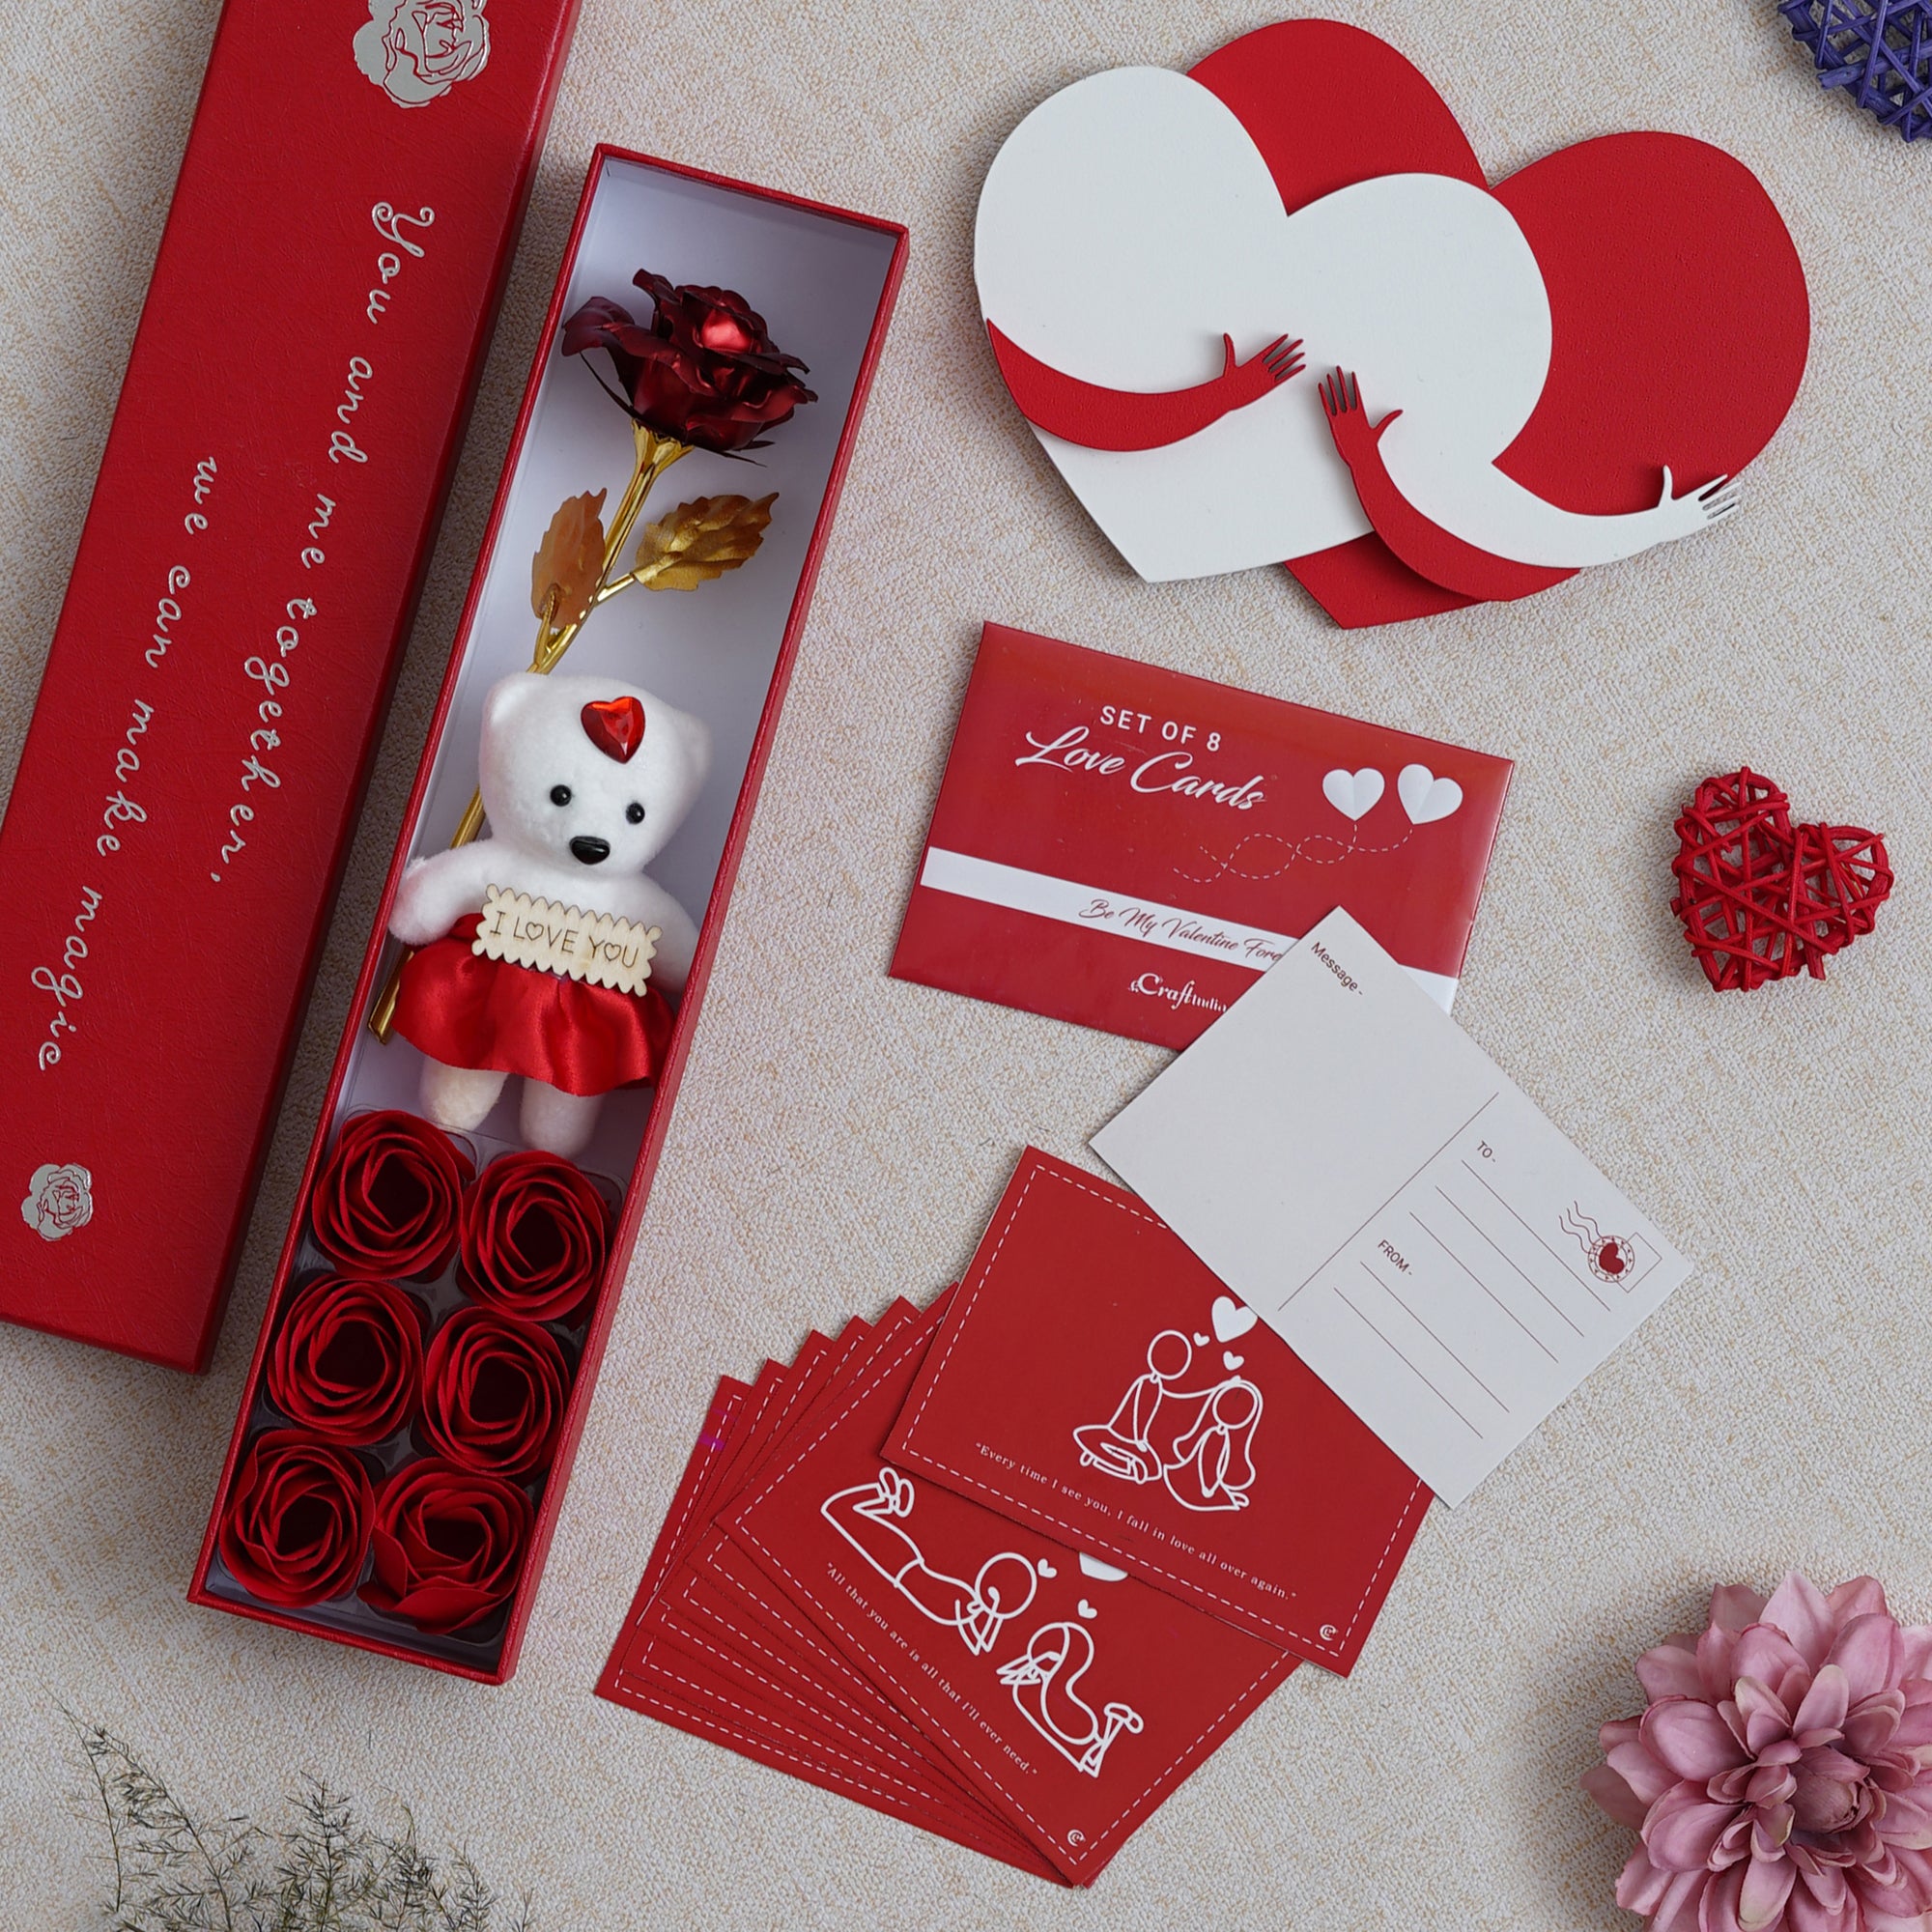 Valentine Combo of Set of 8 Love Post Cards Gift Cards Set, Red Gift Box with Teddy & Roses, Red and White Heart Hugging Each Other Gift Set